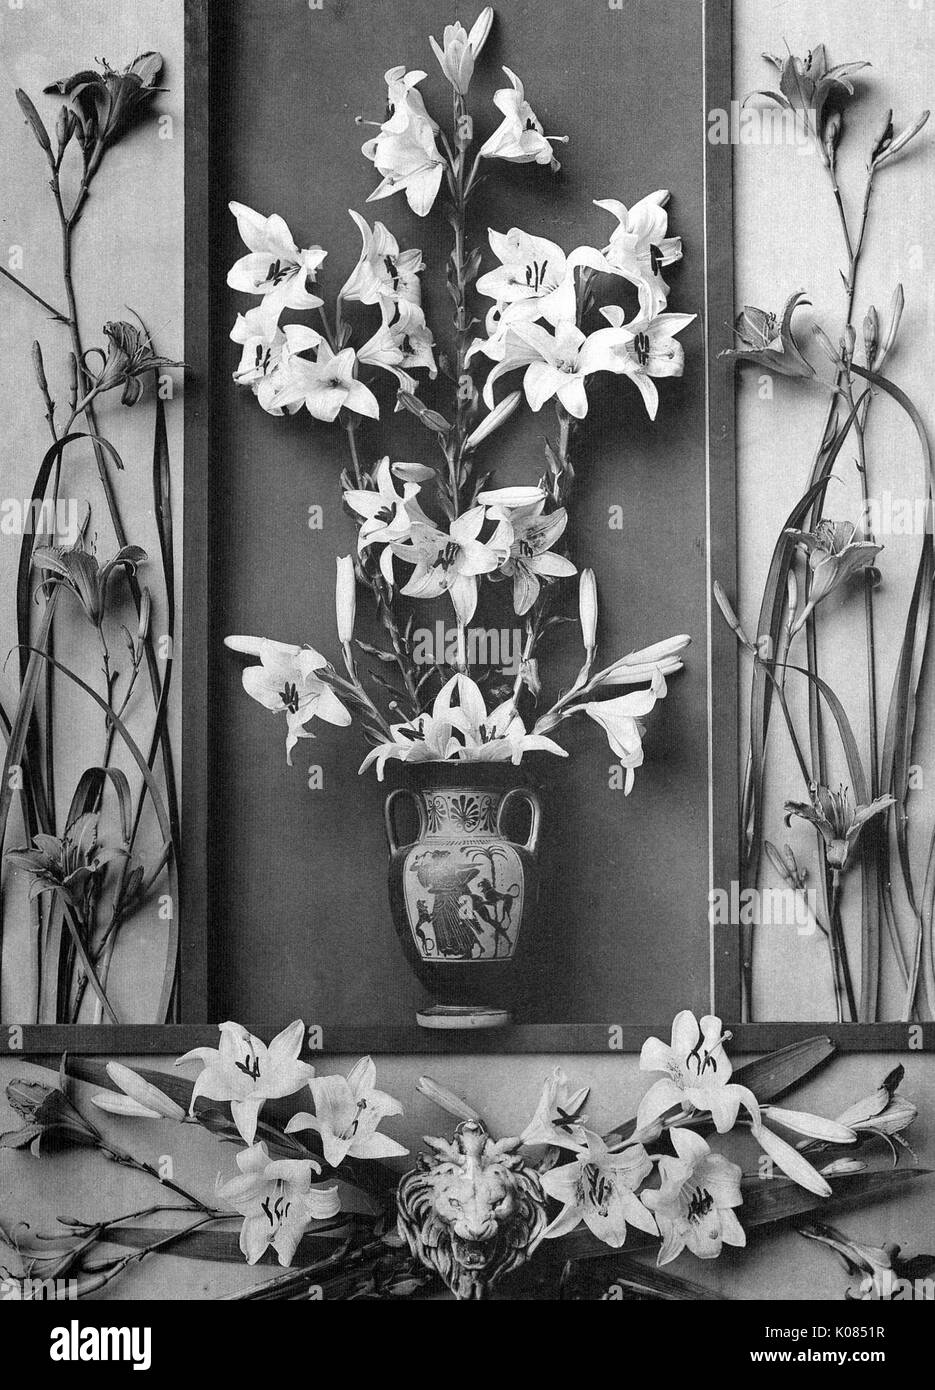 Symmetrical design of lily flowers on sides and in vase, lion ornament on bottom in middle of lily flowers, 1900. Stock Photo